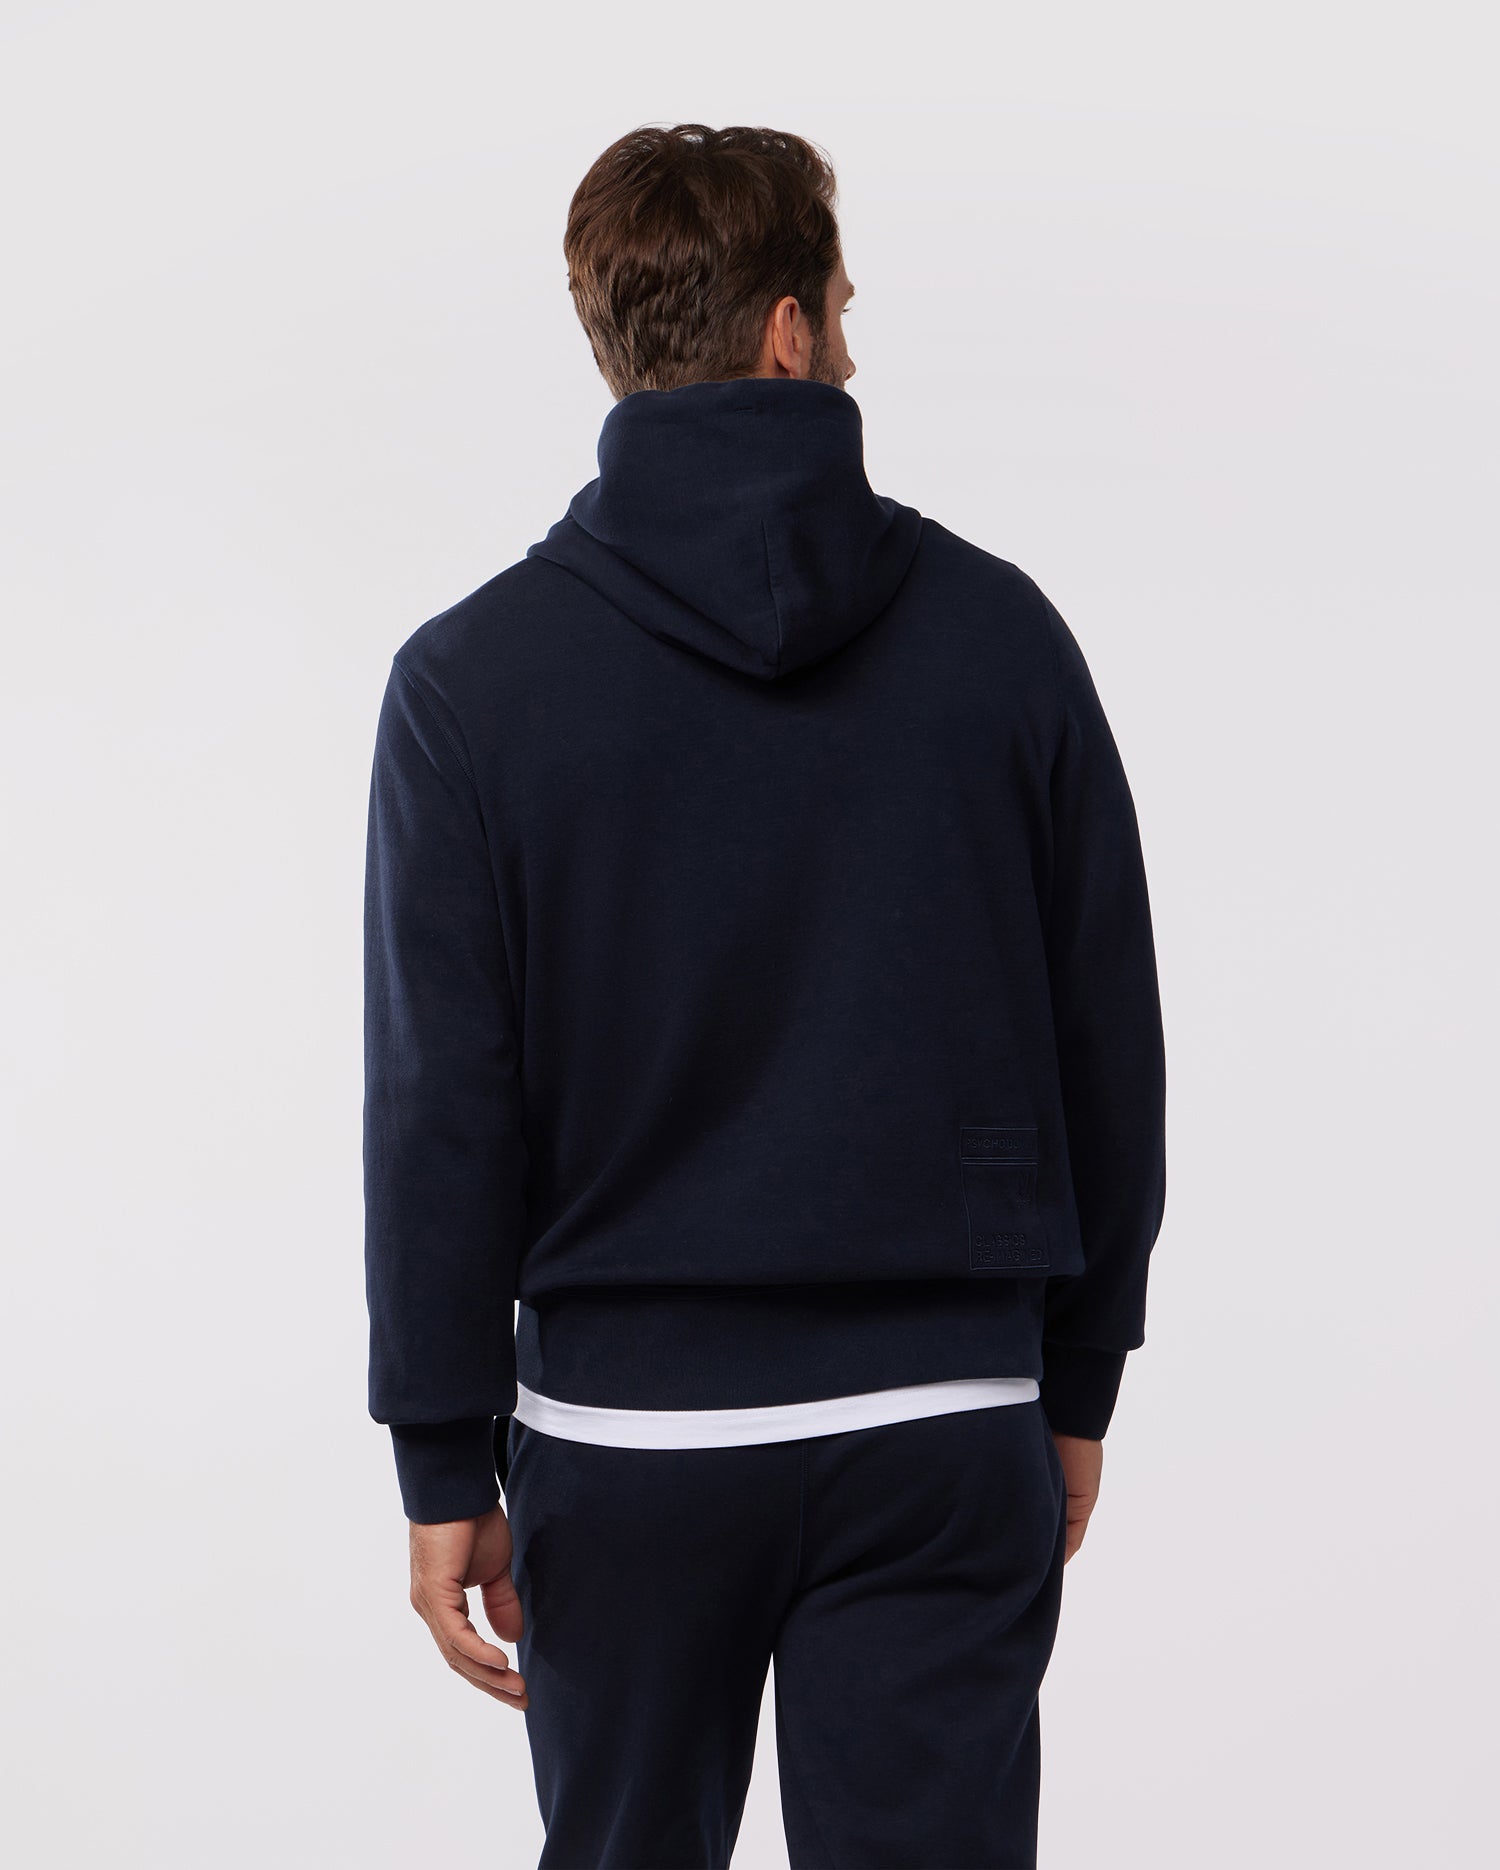 MENS OUTLINE NAVY BLUE PULLOVER HOODIE | PSYCHO BUNNY – Psycho Bunny